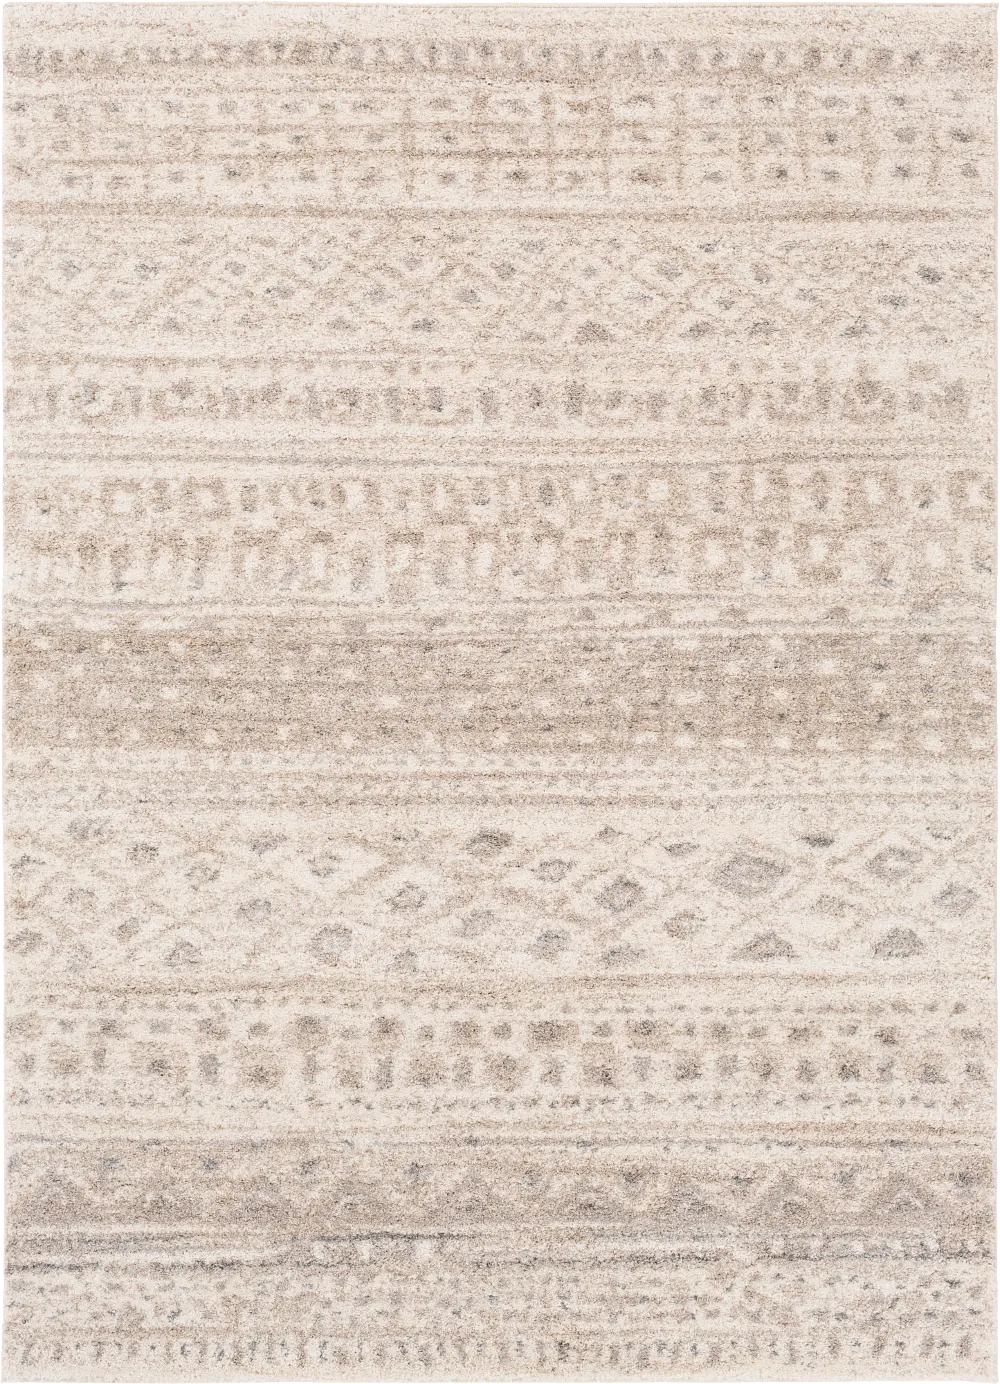 5 x 7 Ivory High Pile Woven Rug - Fowler-1